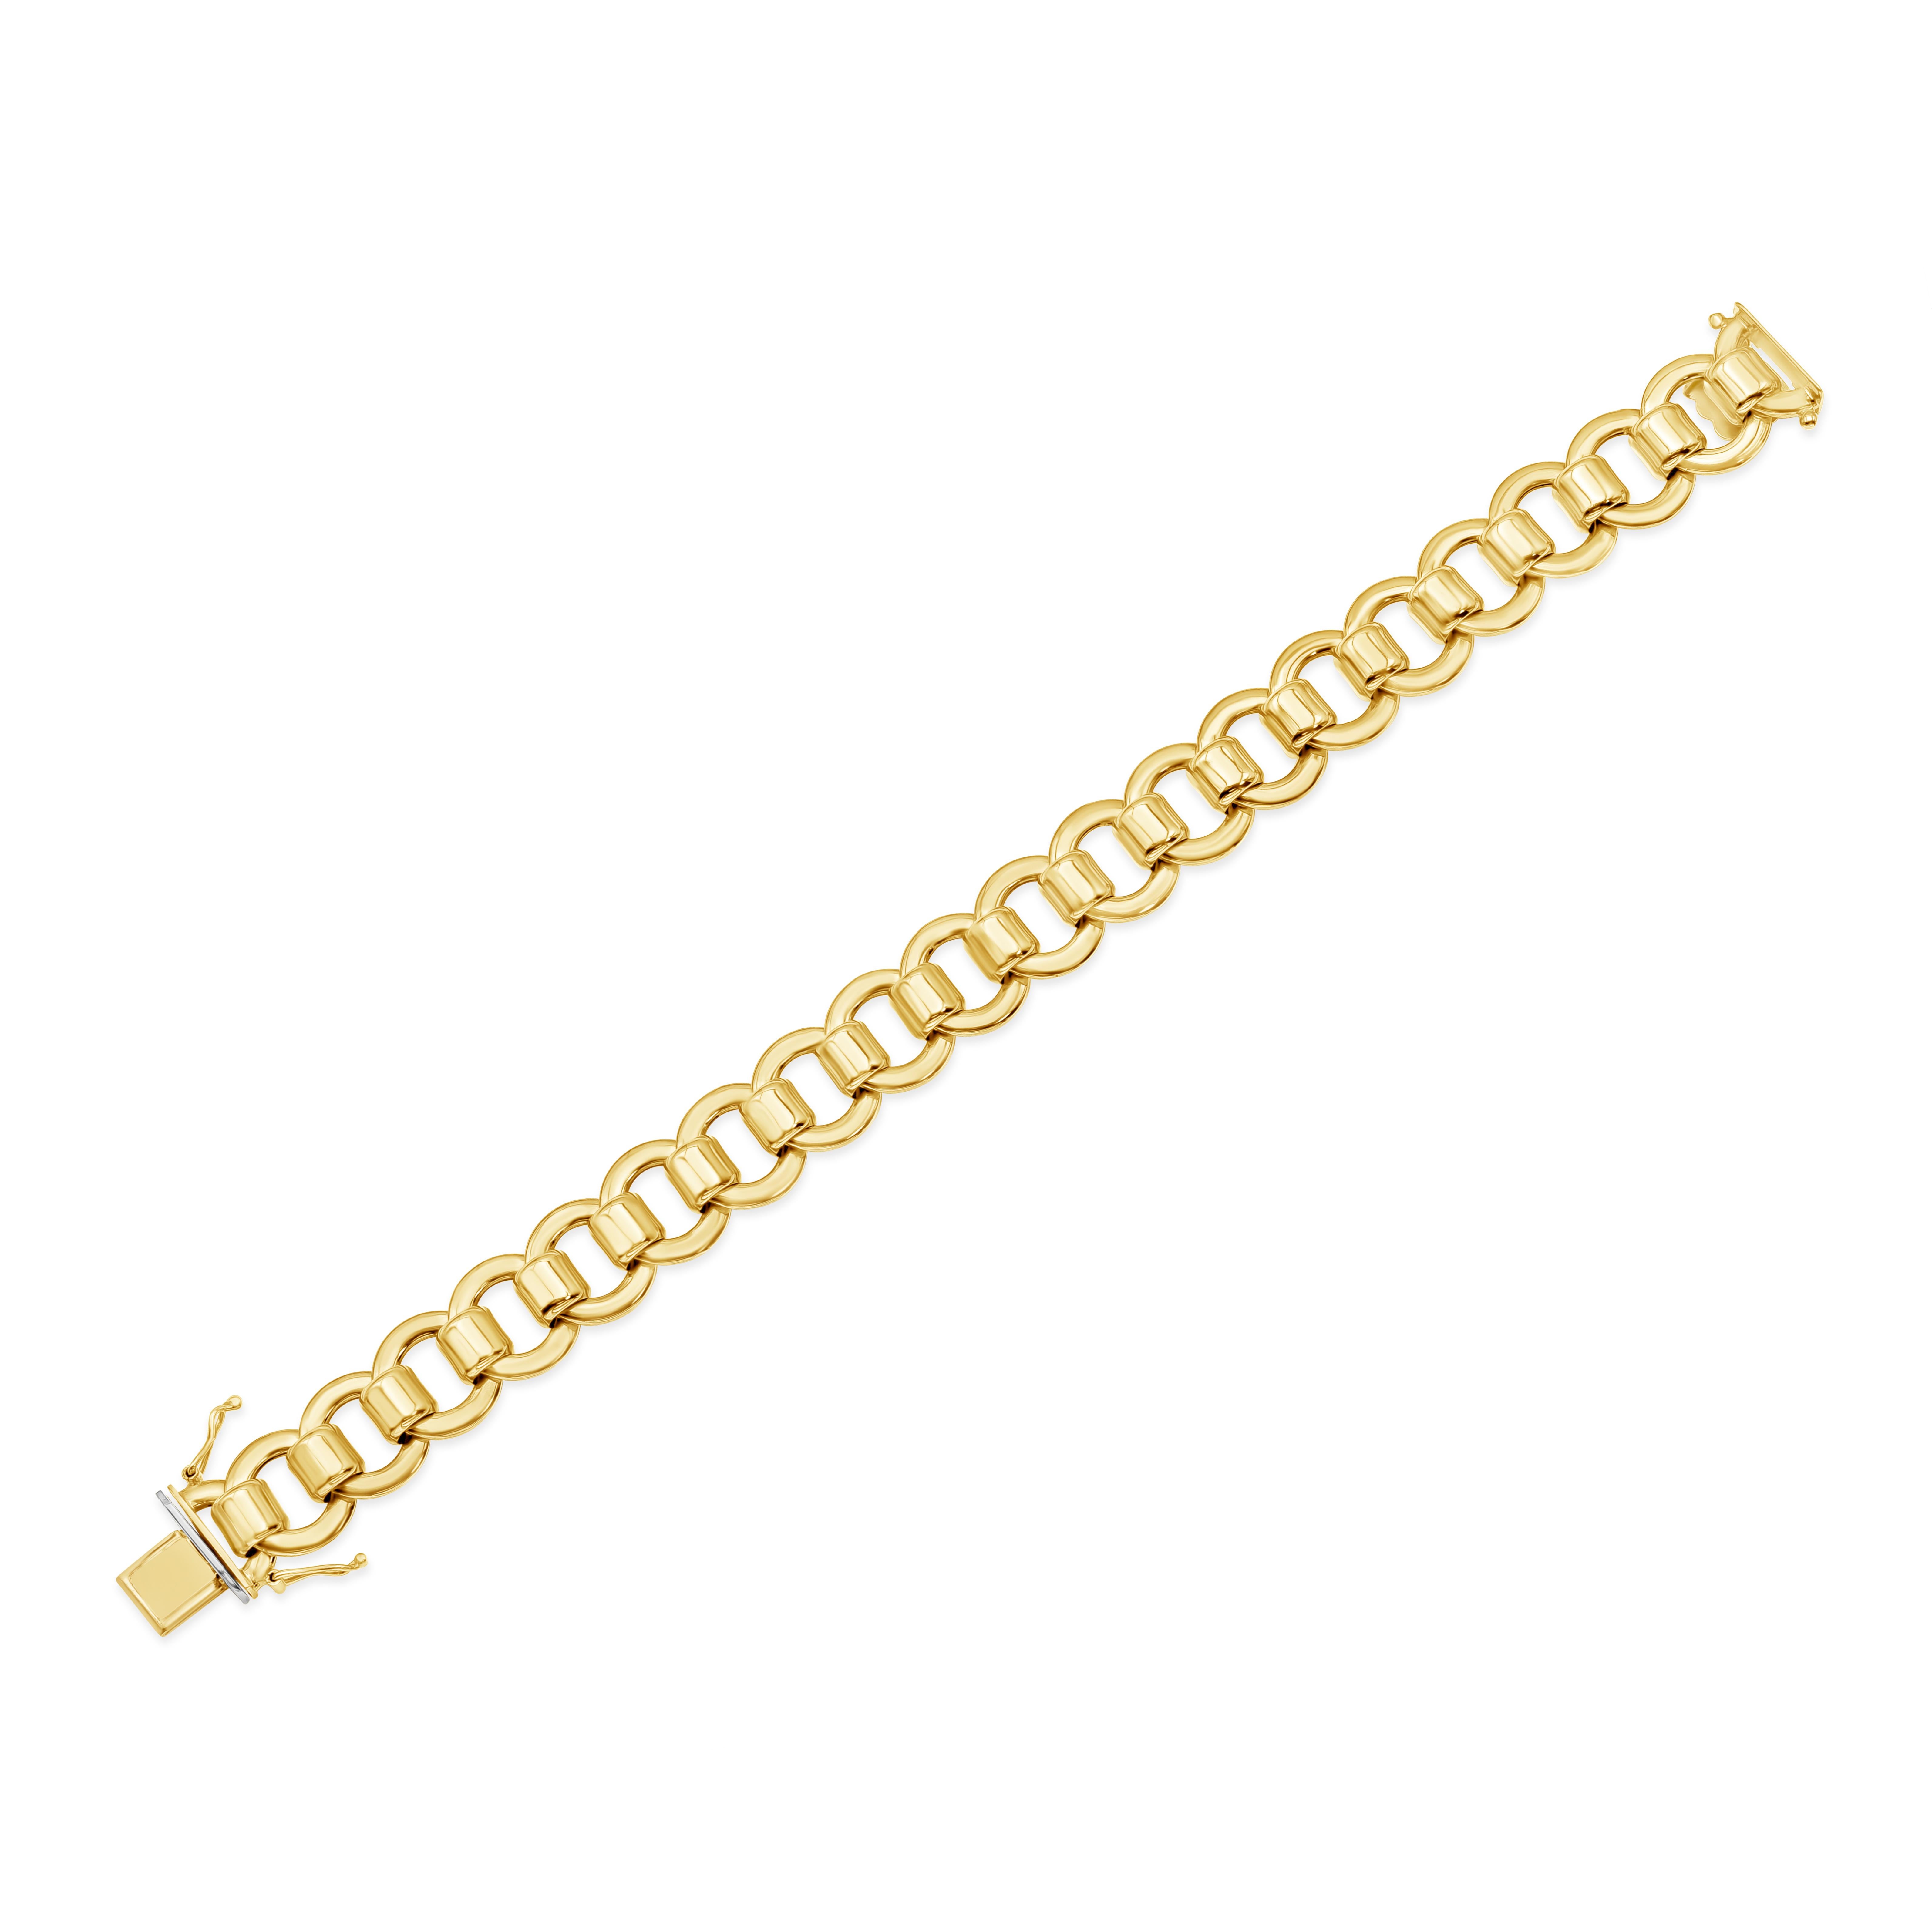 This modernist design round link chain bracelet is made in 14 karats yellow gold.

With matching necklace, please check our inventory and contact us for more information.